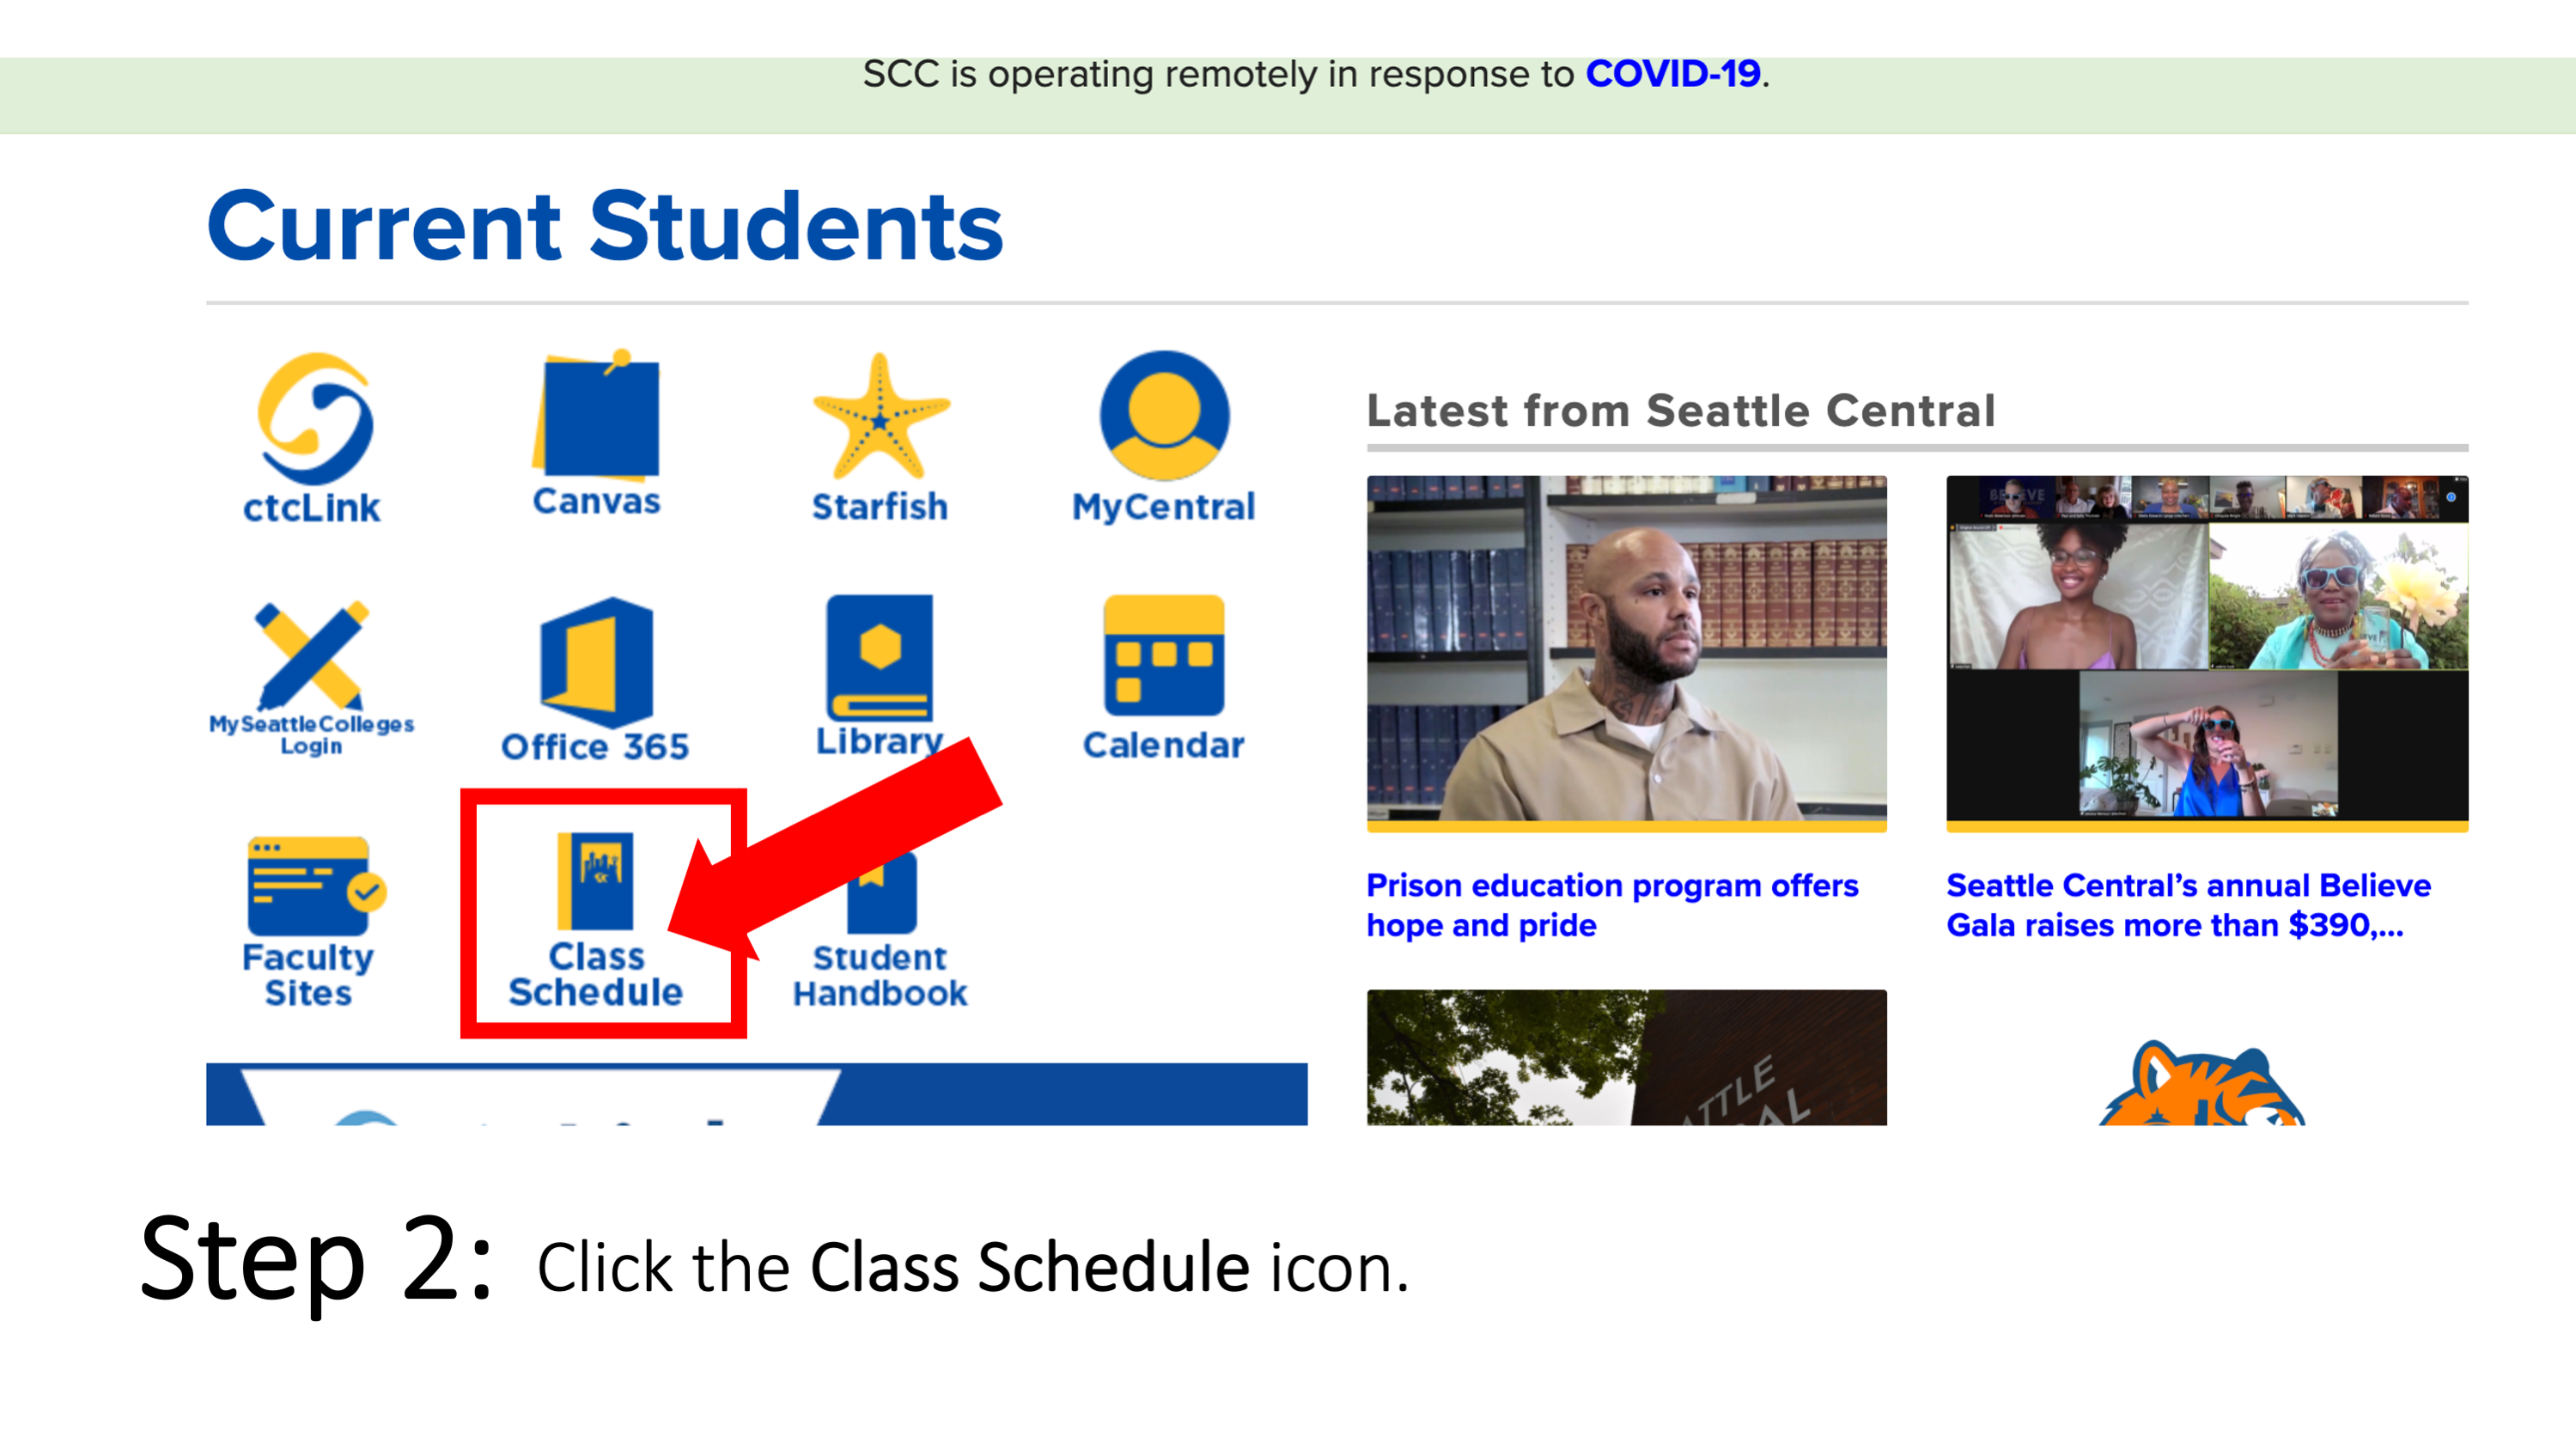 Step 2: Click on Class Schedule.